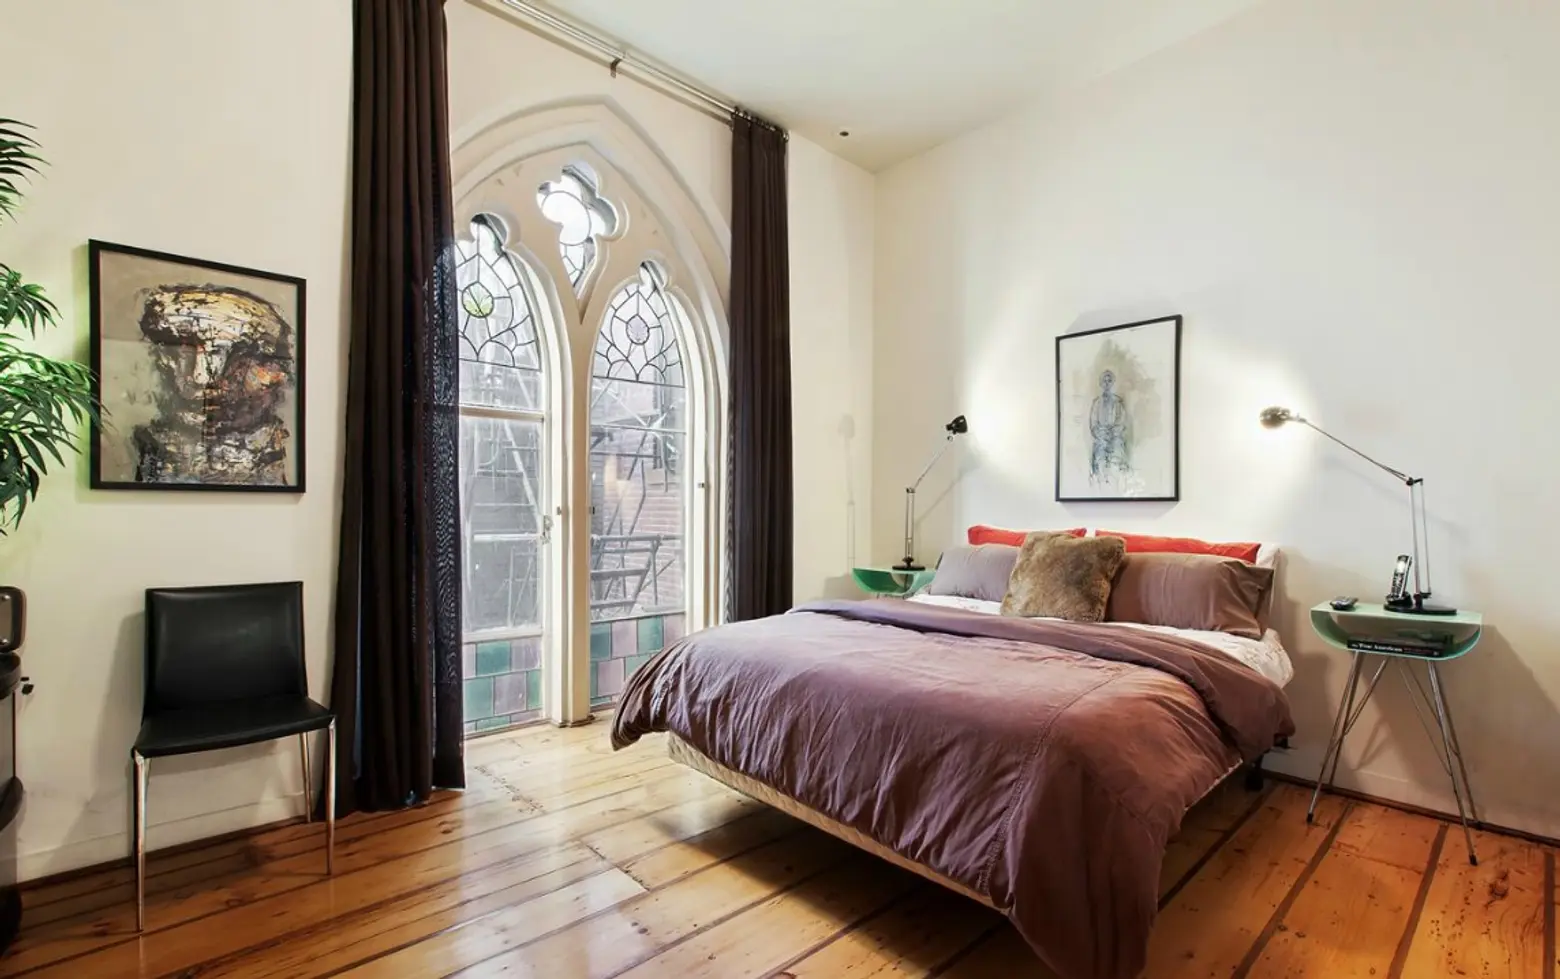 $2.2M Brooklyn Heights Loft with Gothic-Style Stained Glass Windows Is Simply Heavenly